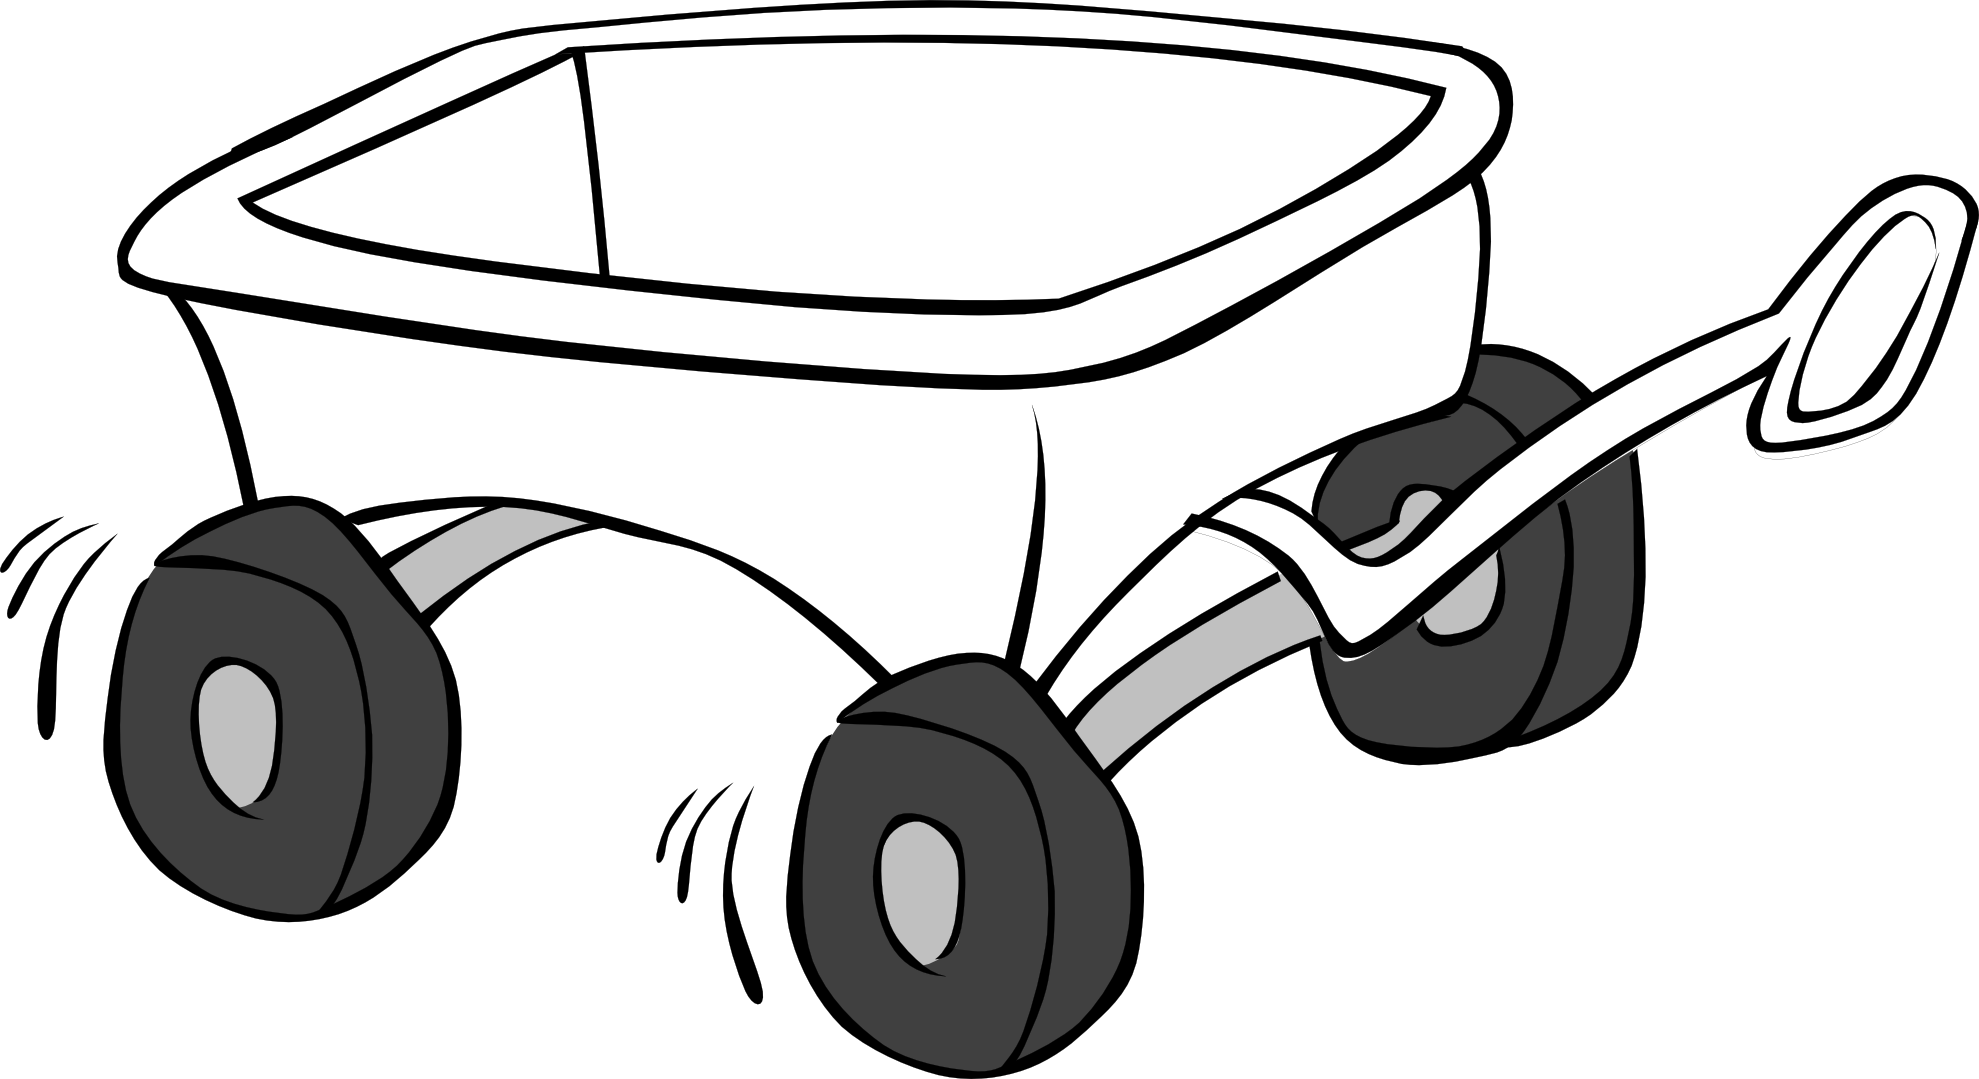 Best Photos of Wagon Coloring Page - Wagon Coloring Pages ...